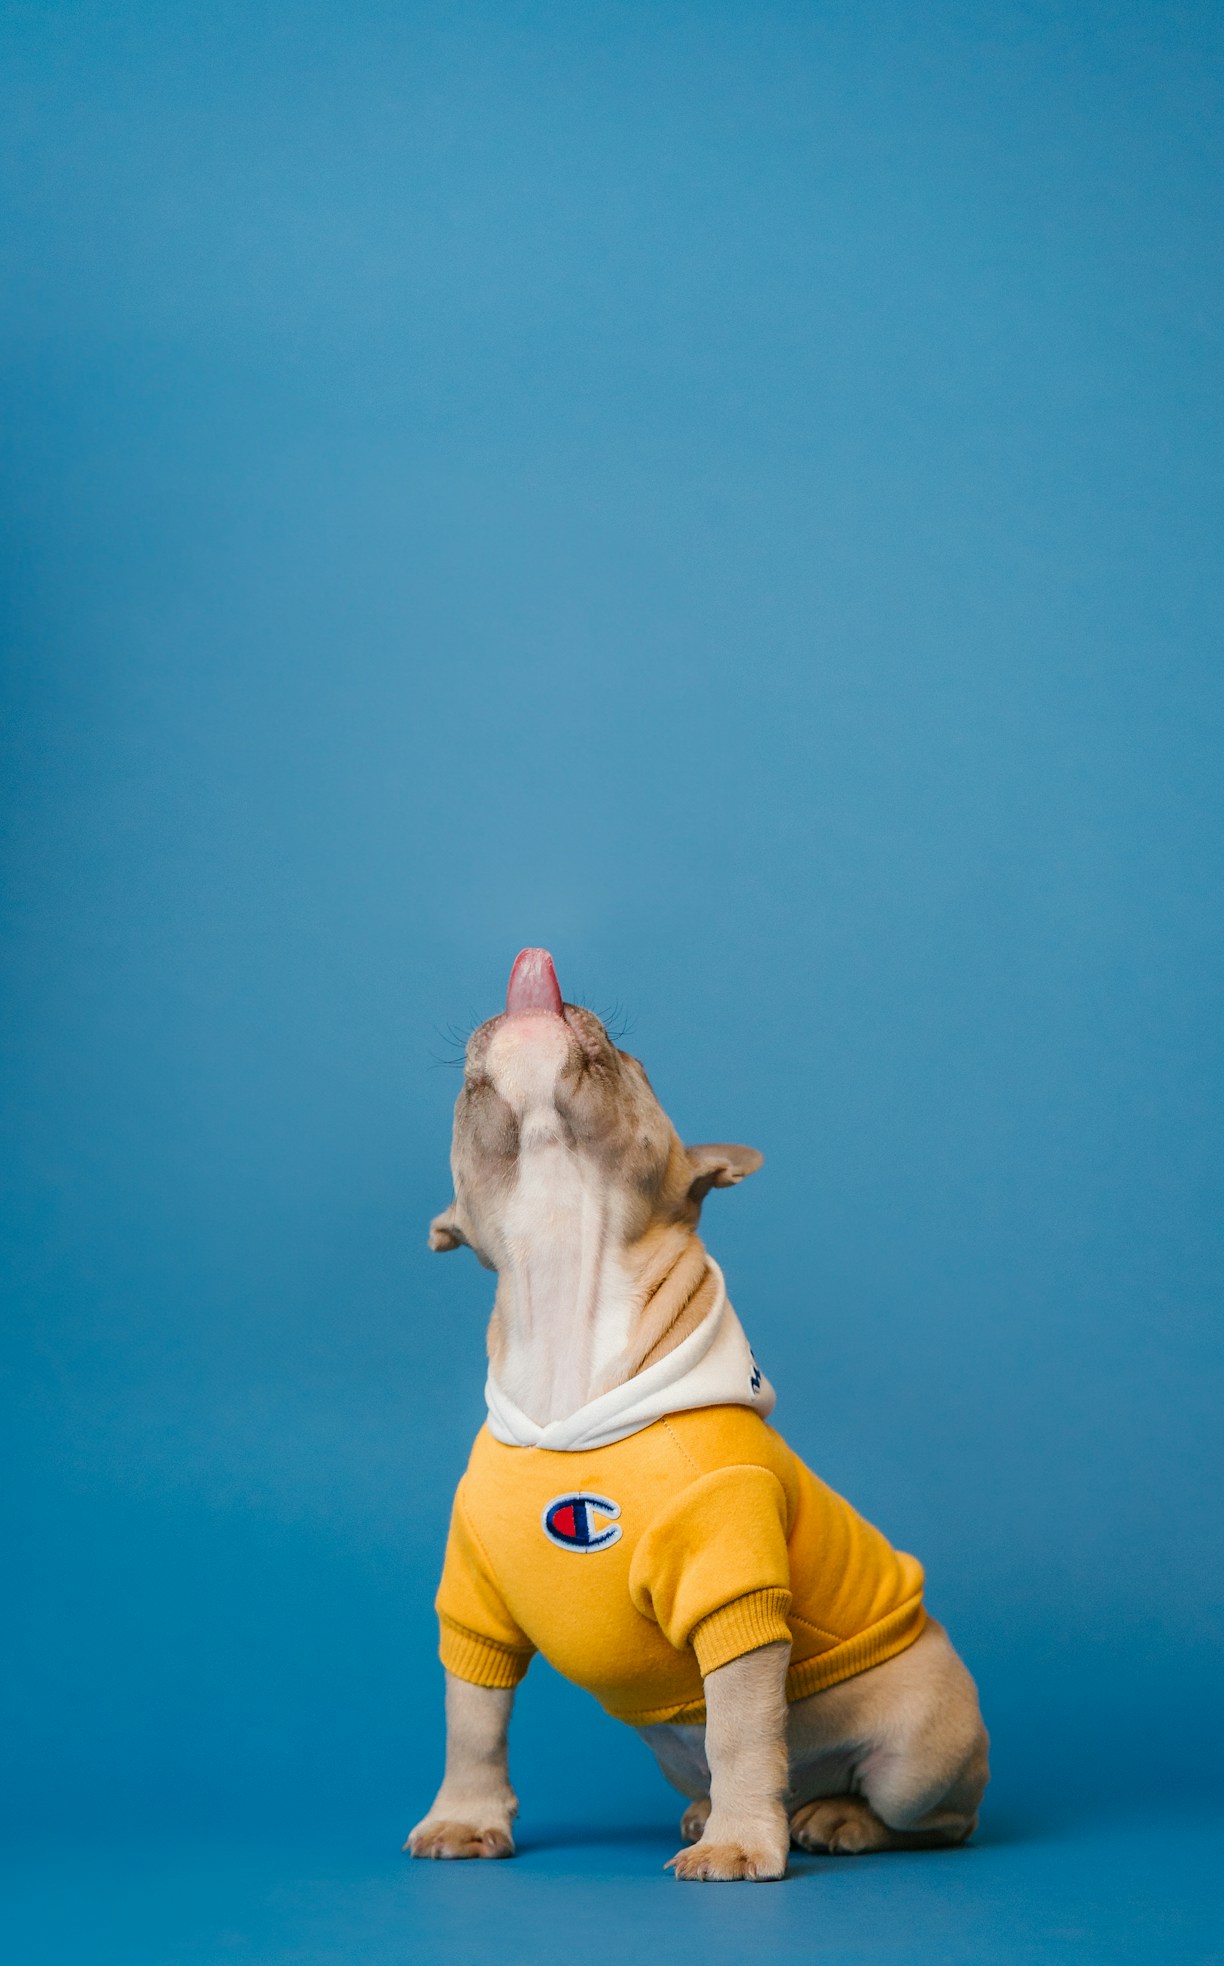 a small dog wearing a yellow shorts and a white shirt